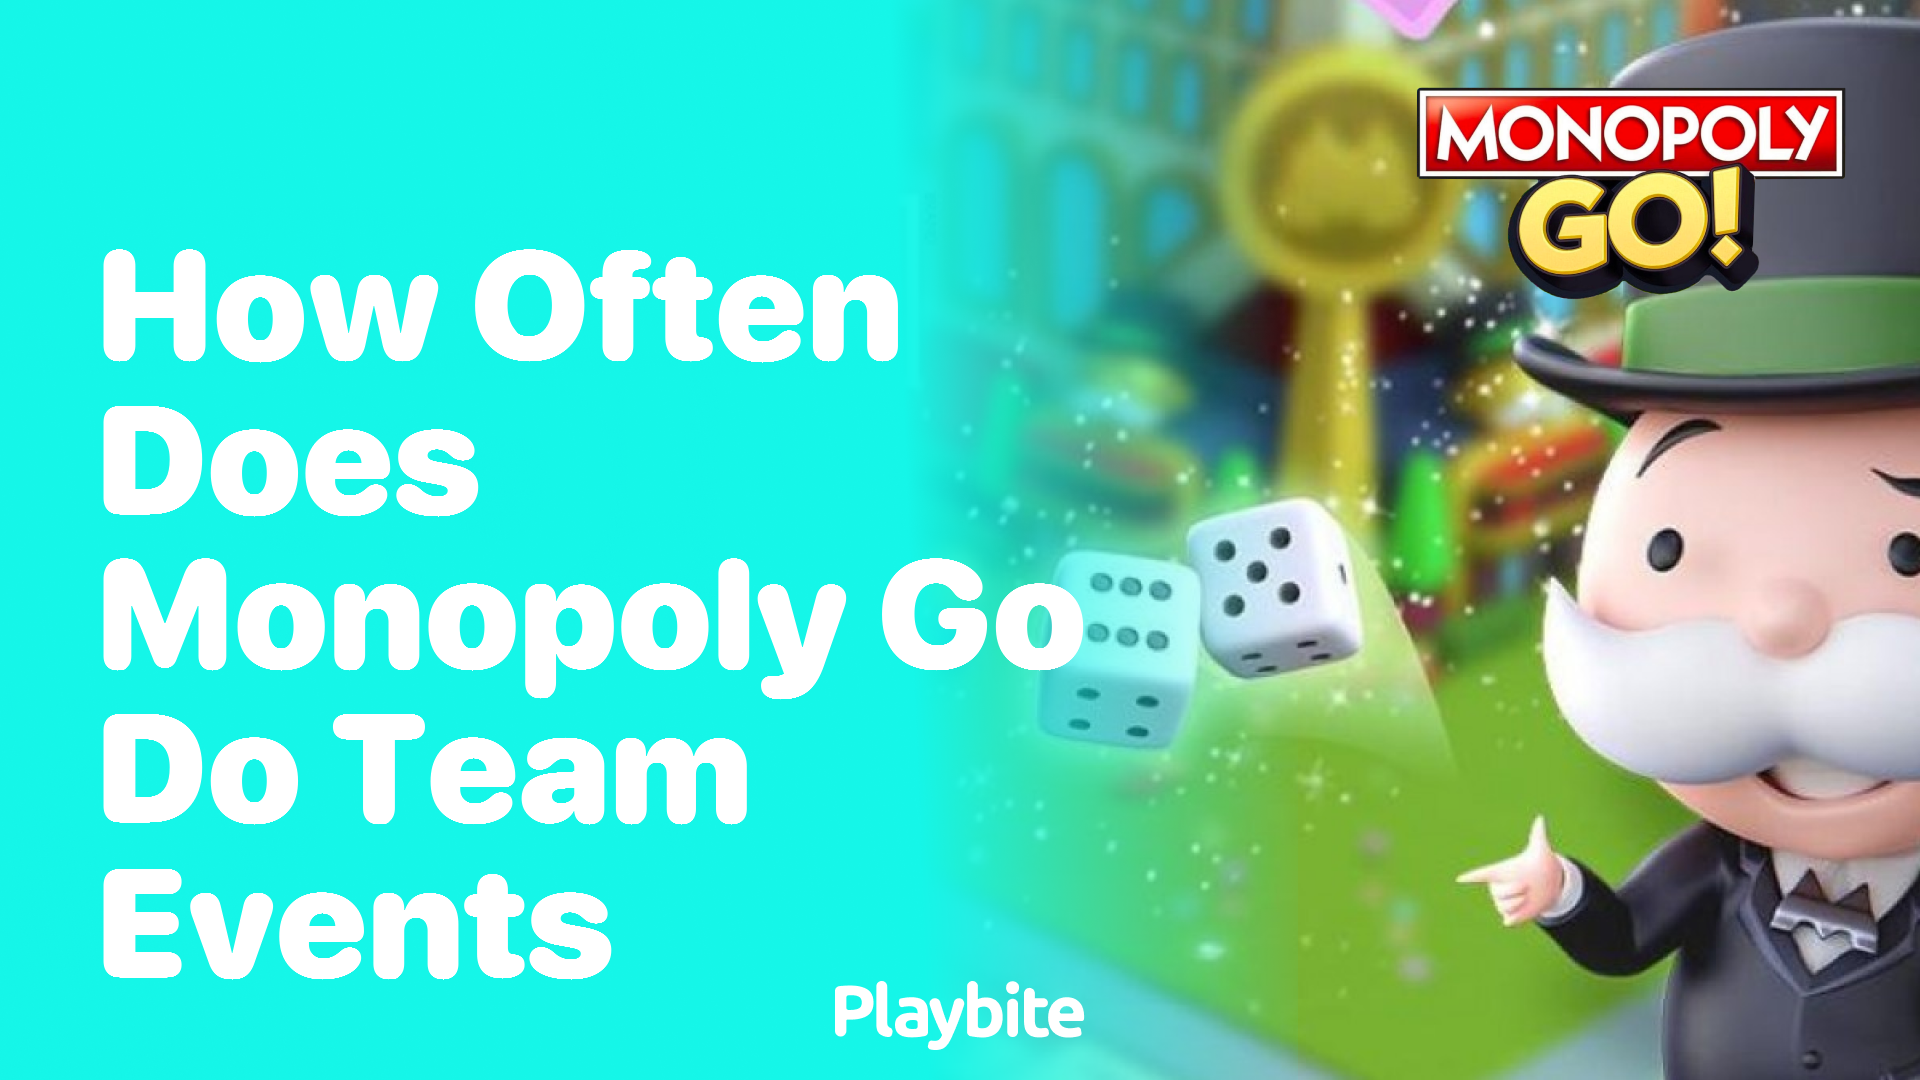 How Often Does Monopoly Go Host Team Events?